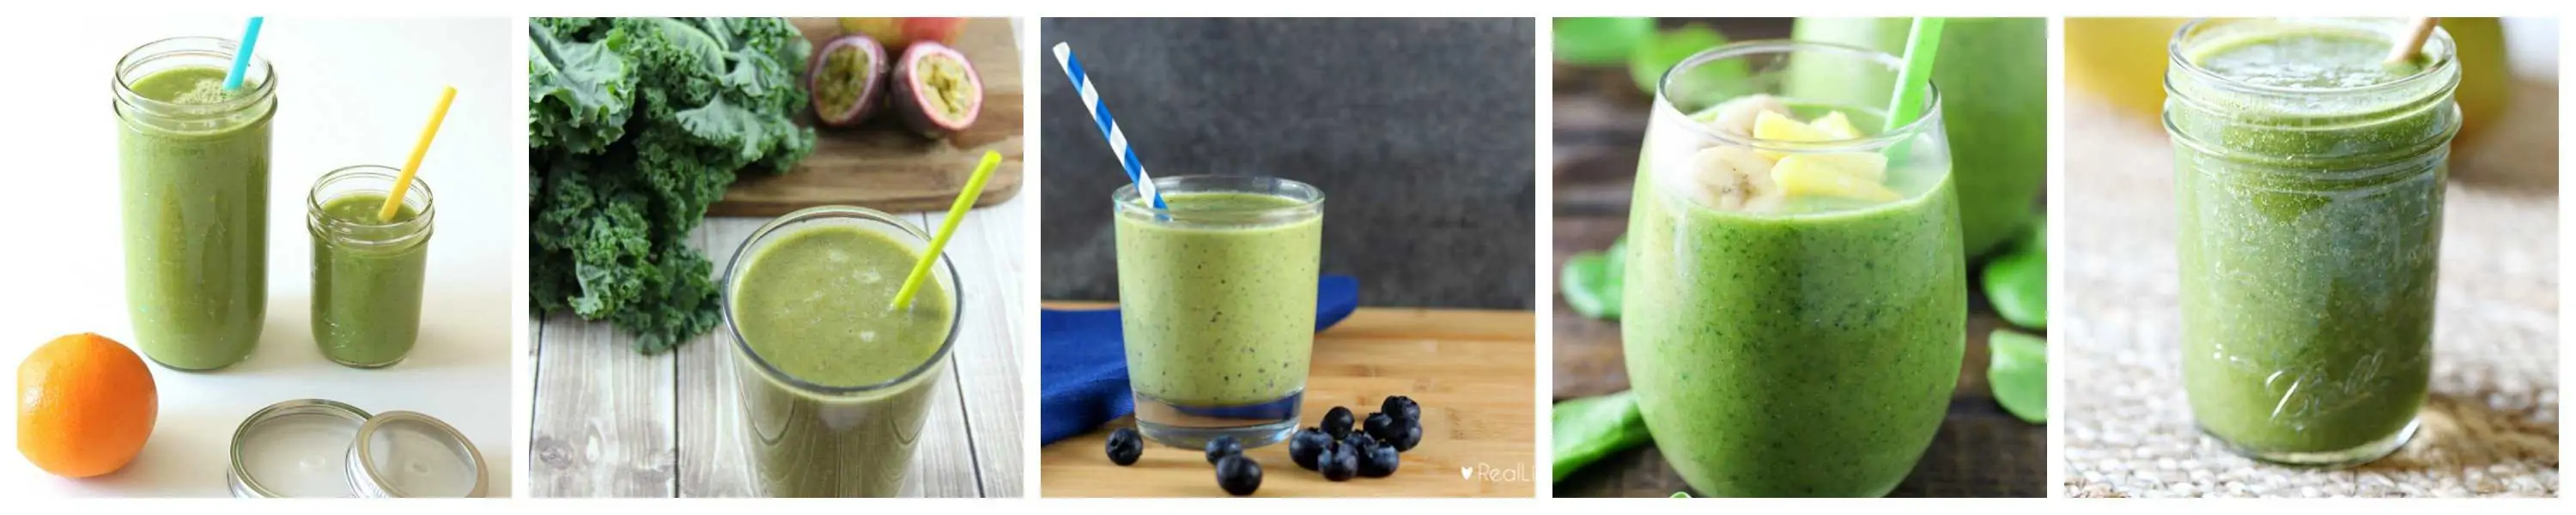 Green Smoothies Your Kids Will Love: collage of 5 smoothies in clear glasses